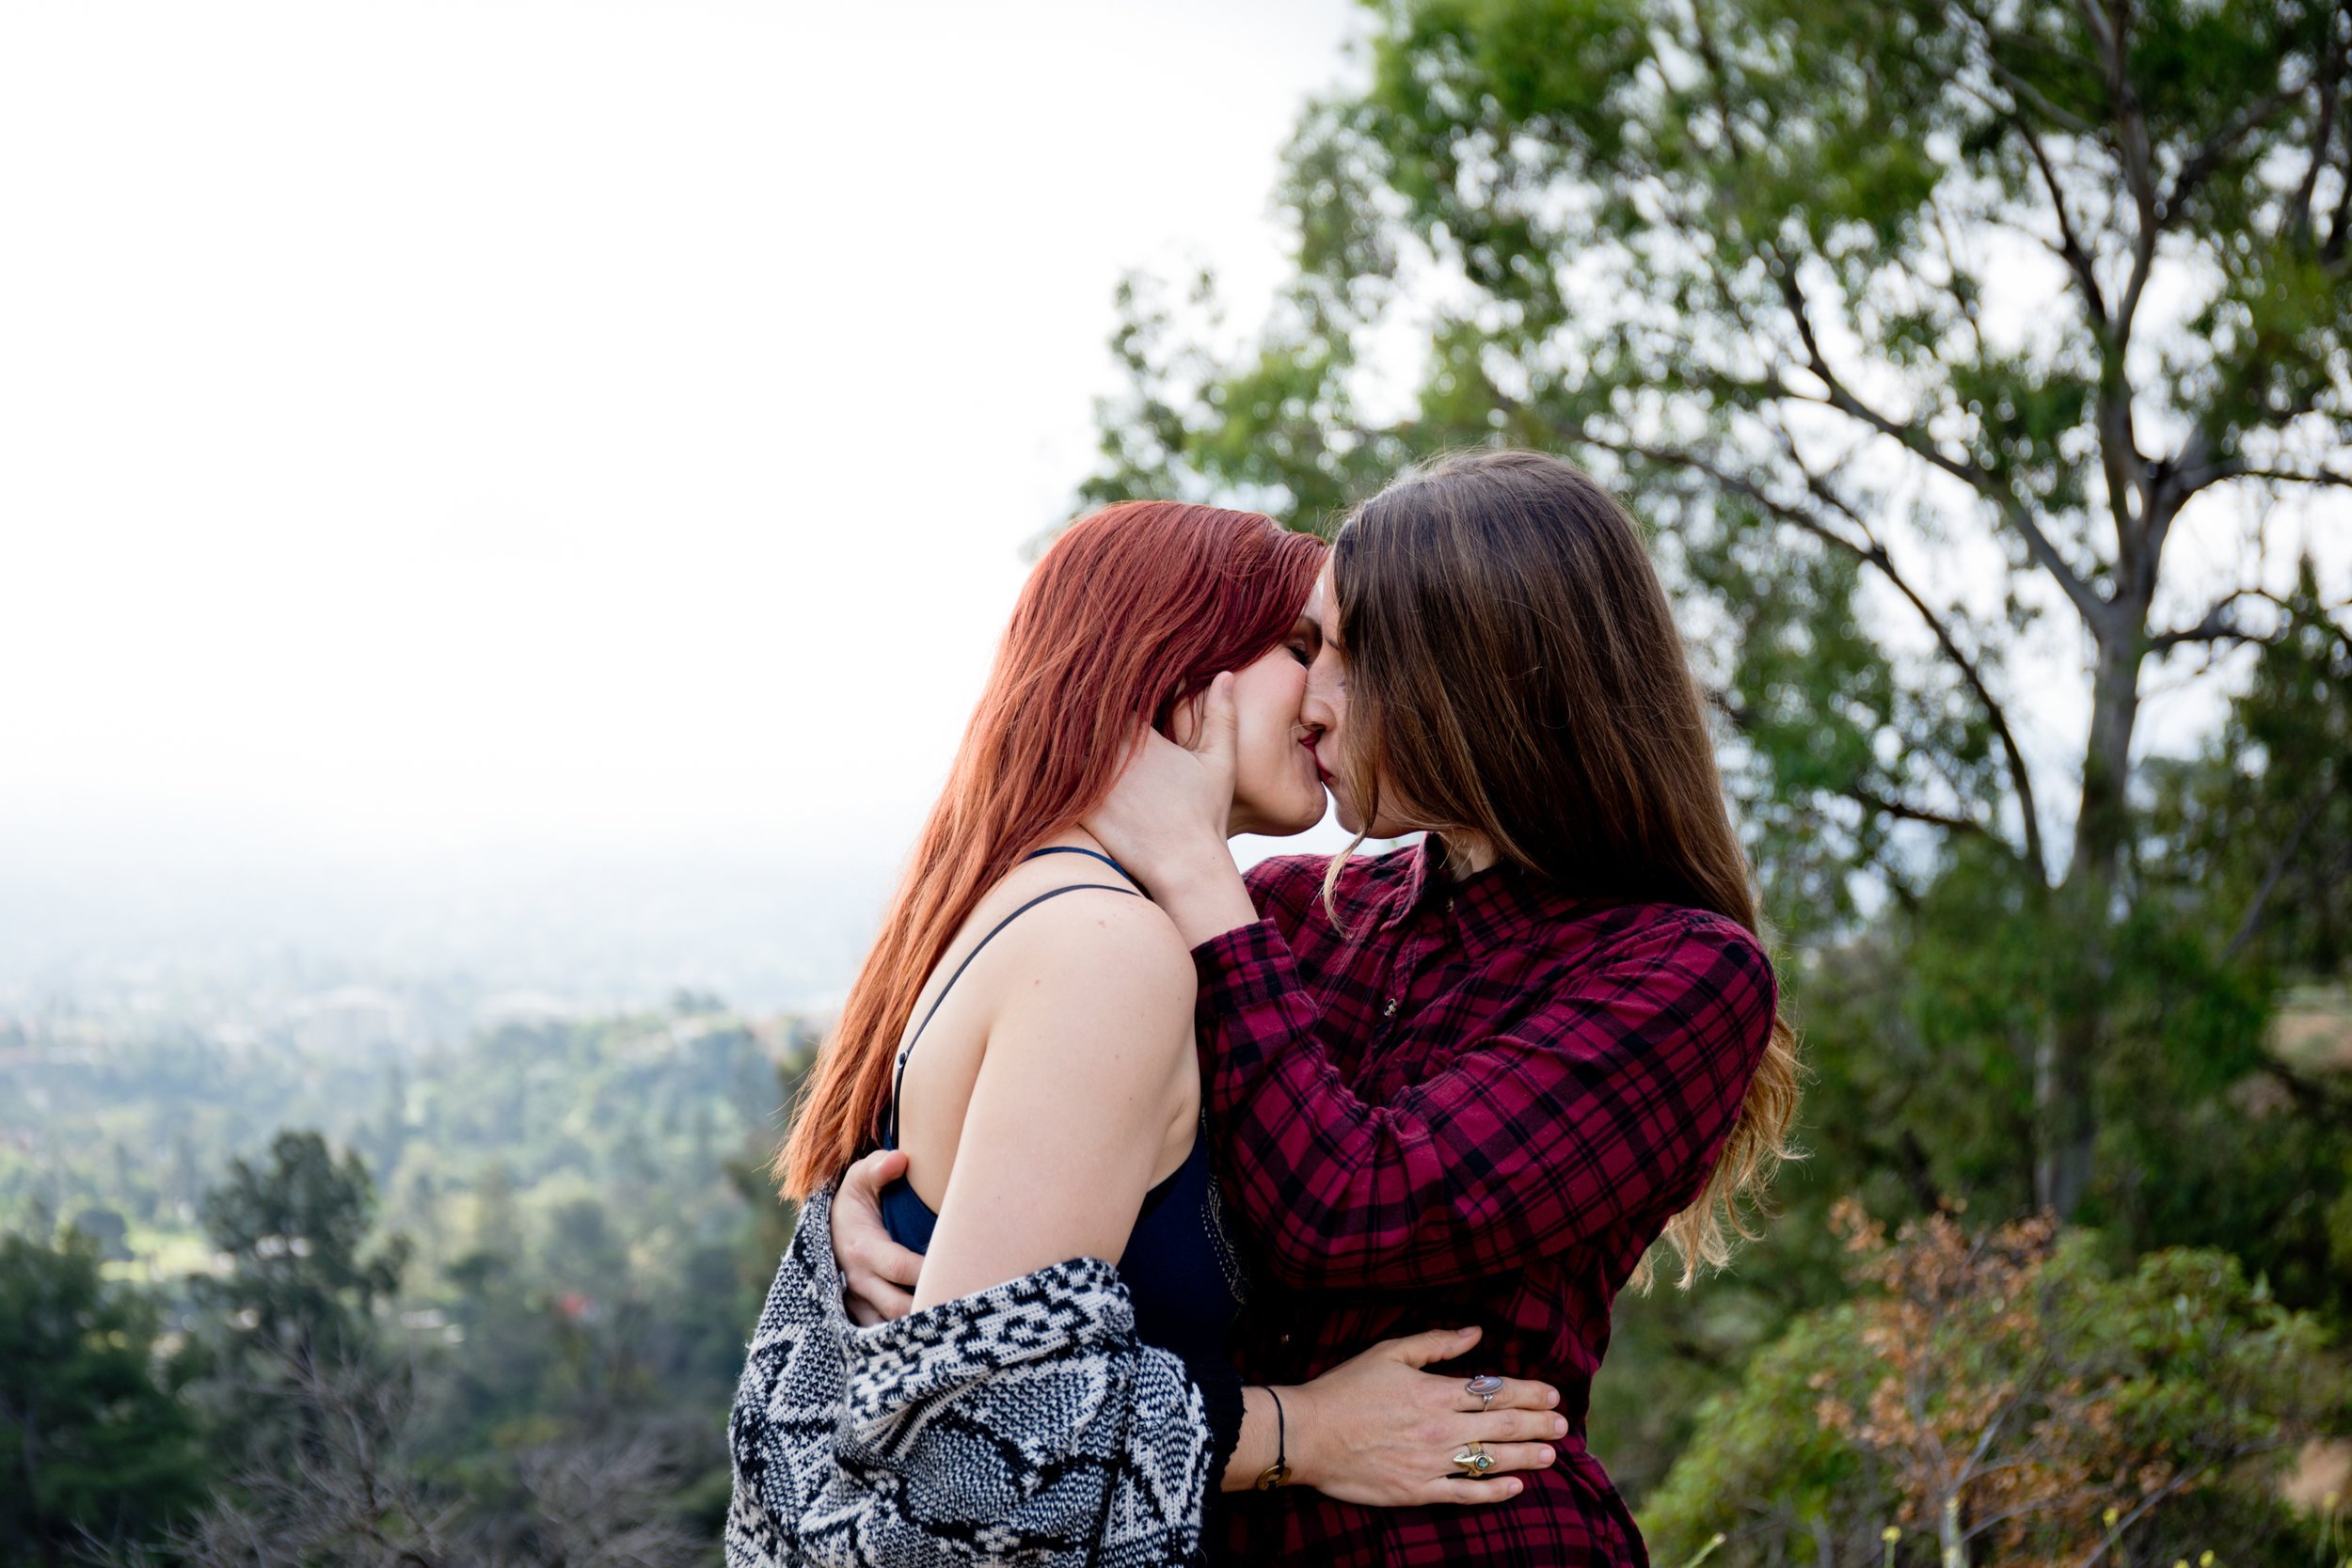 Courtney &amp; Tierney kissing with the hills of Los Angeles in the background